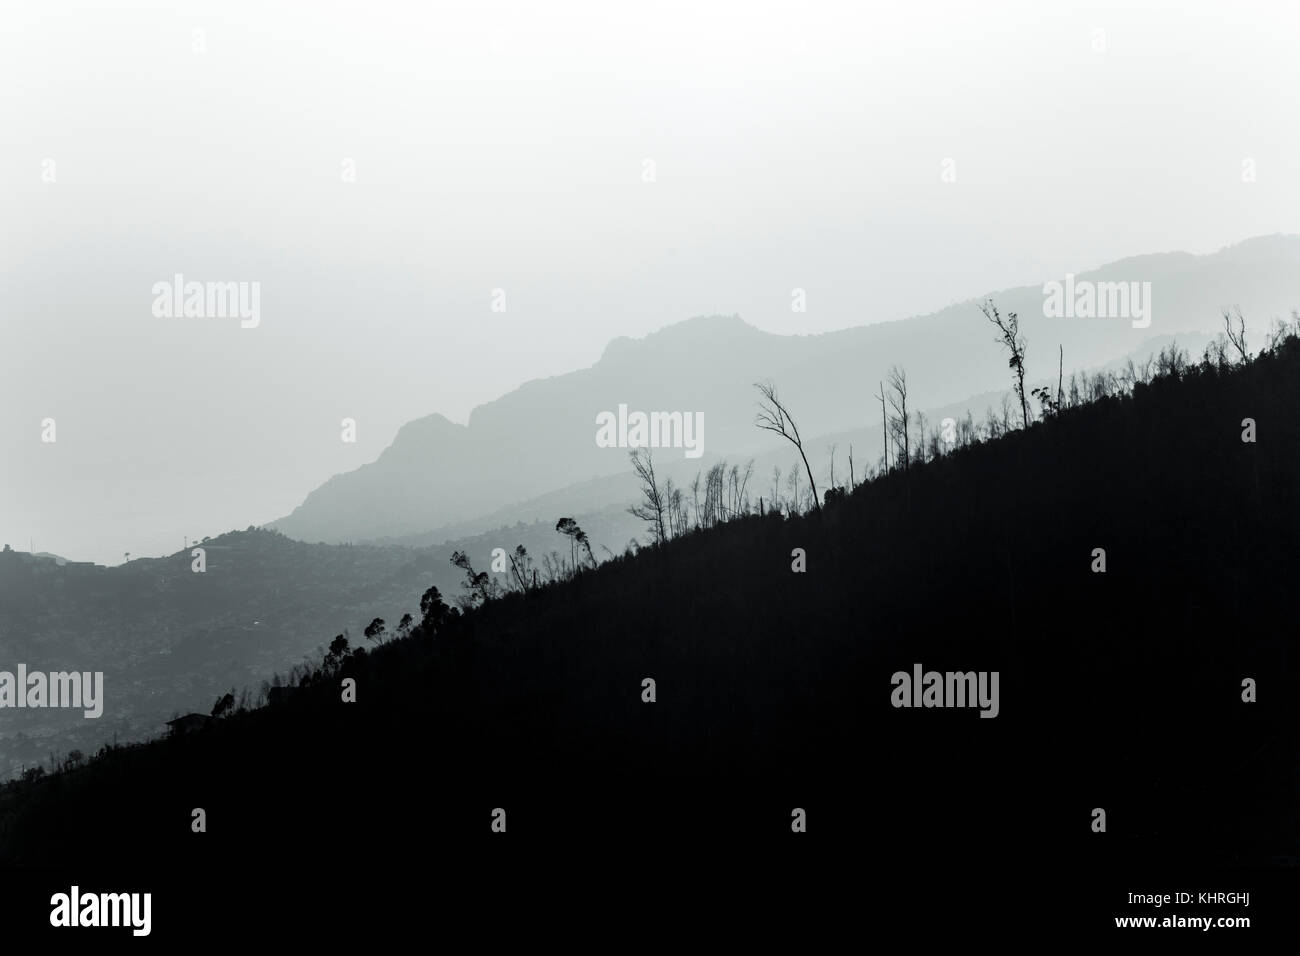 Silhouettes of trees on a hill and mountains at Parc Ecologico do Funchal, Madeira Stock Photo